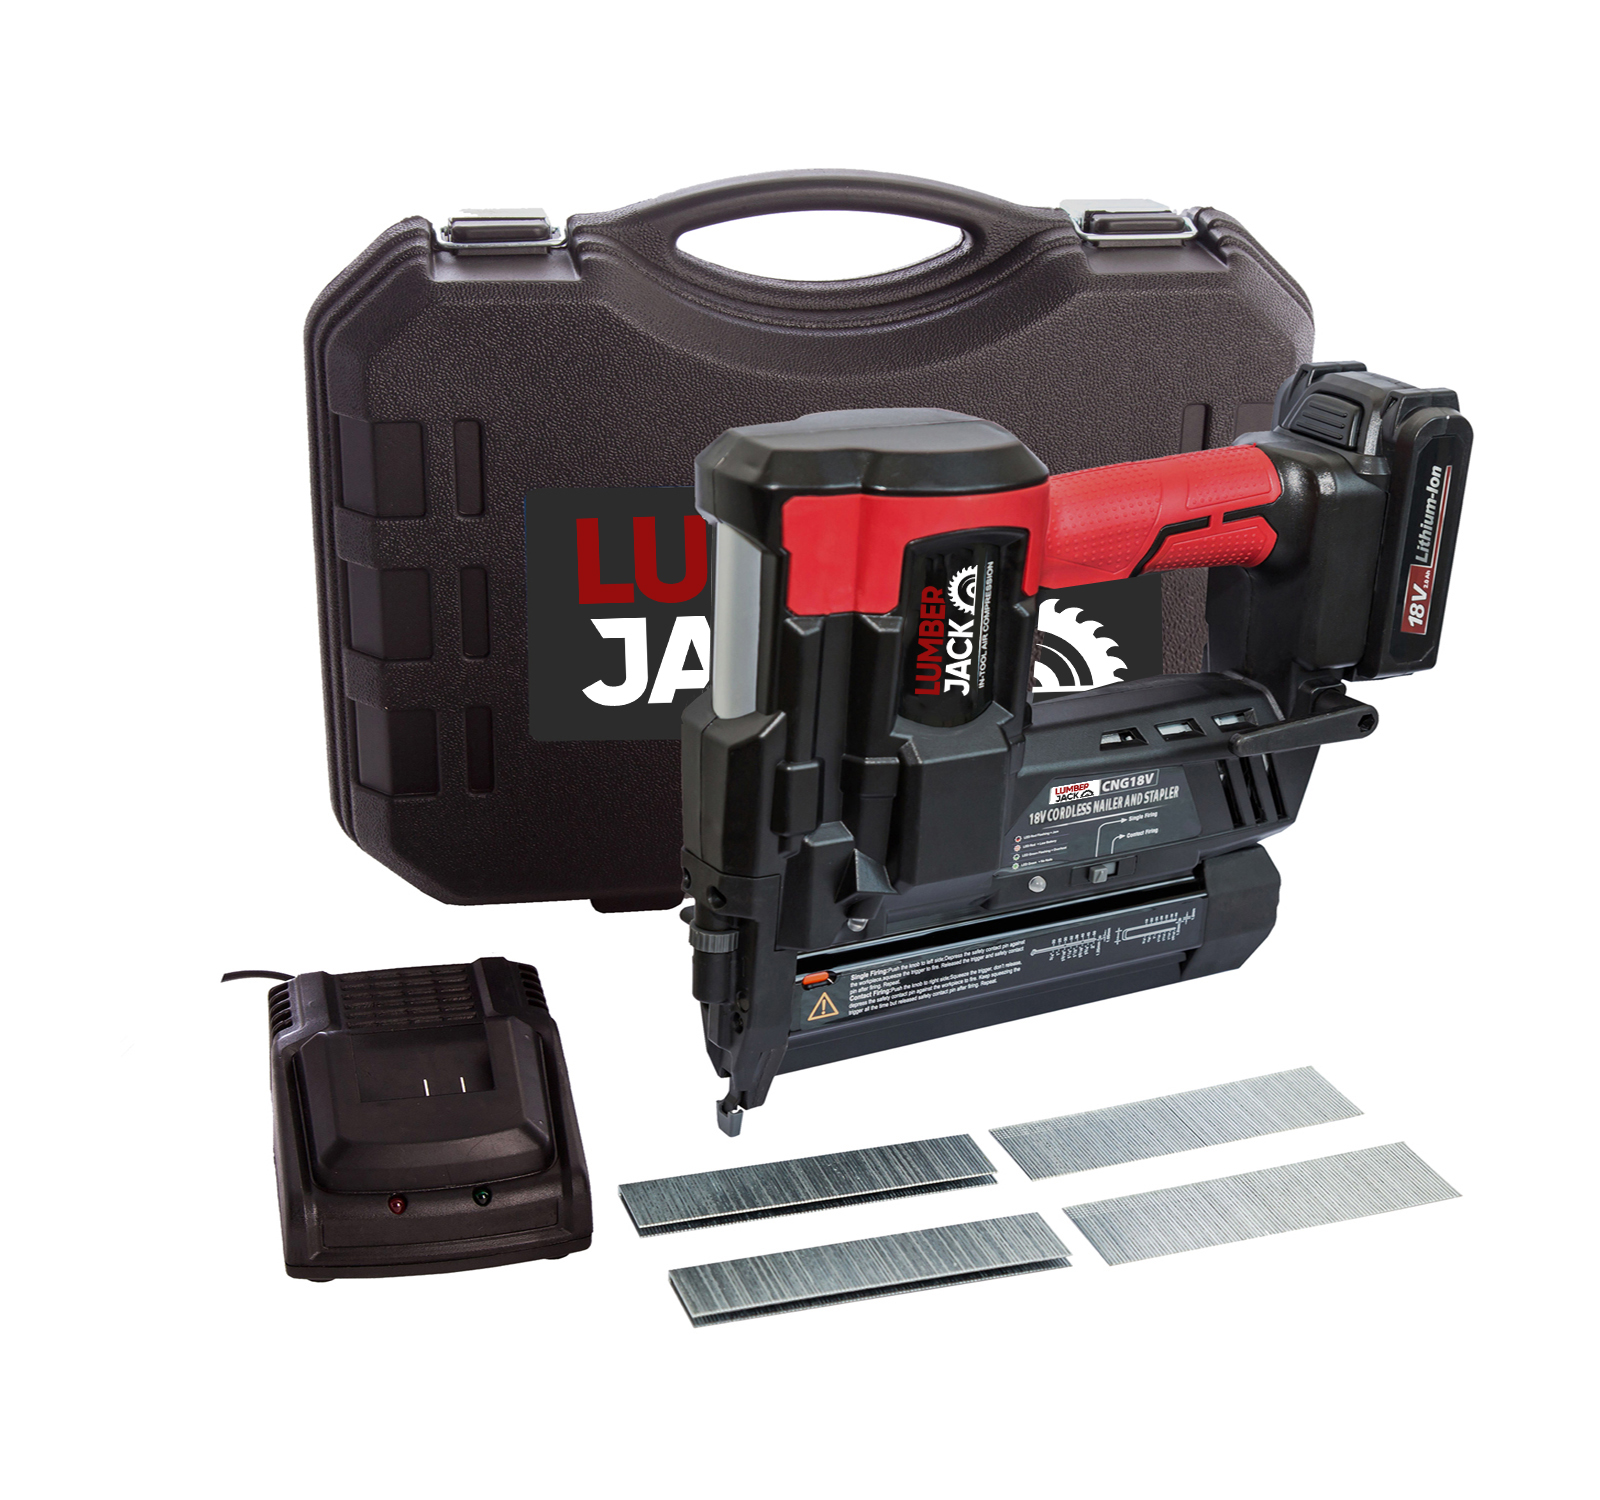 Lumberjack Cordless 18v Nail Staple Gun 2nd Fix Brad Nailer with Battery Charger and Case